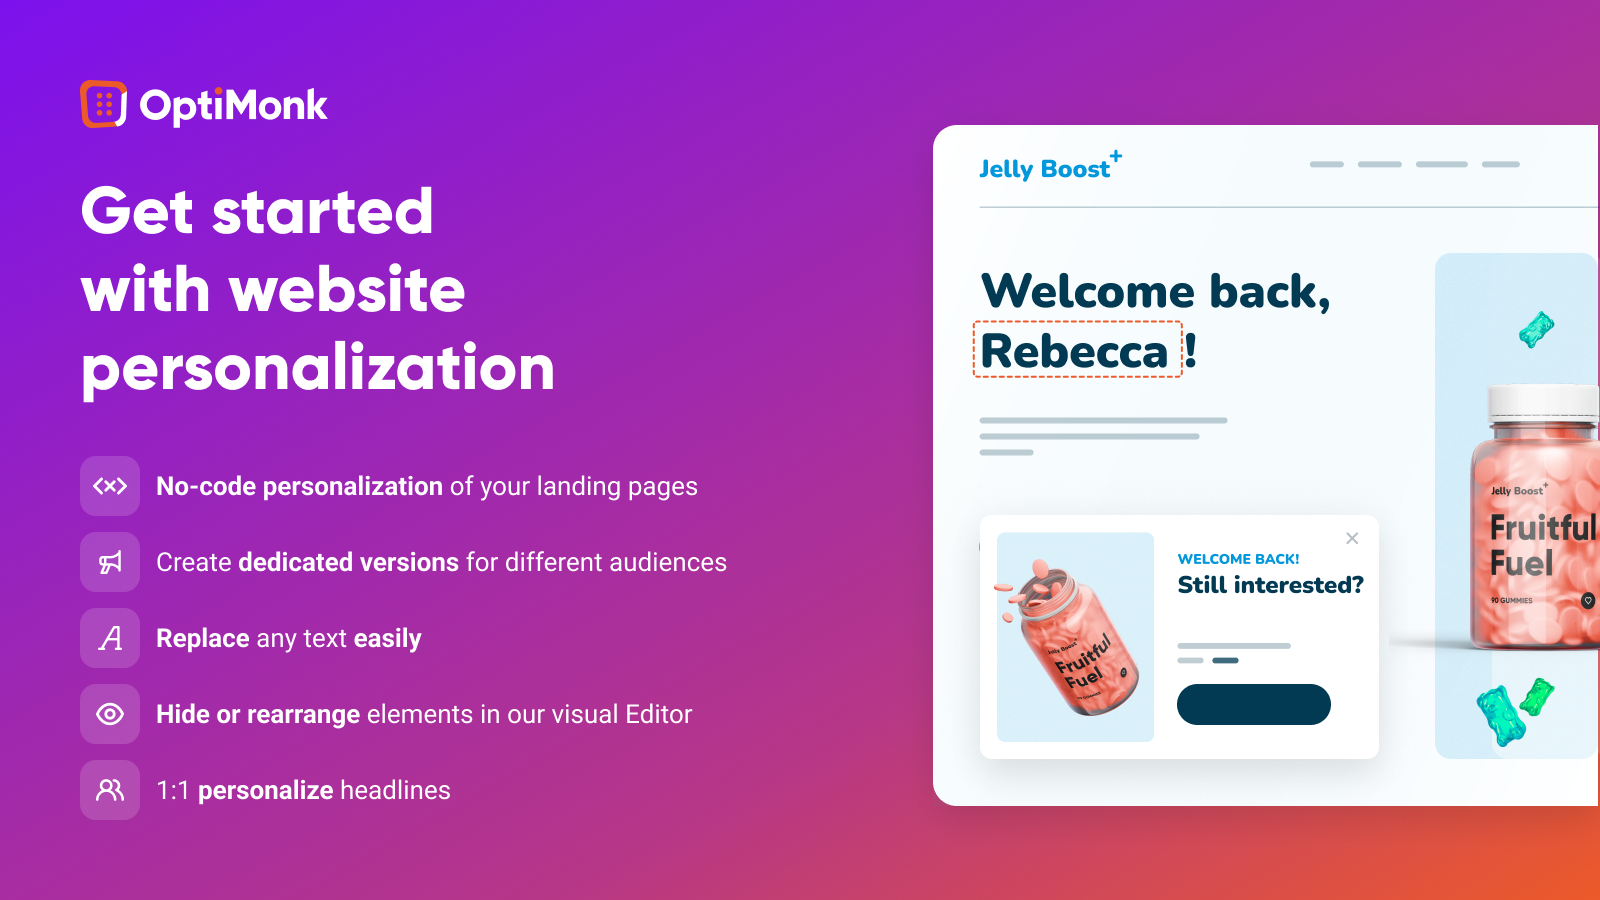 Make every visit unique with no-code personalization by tailoring your website content to your VIP segments.